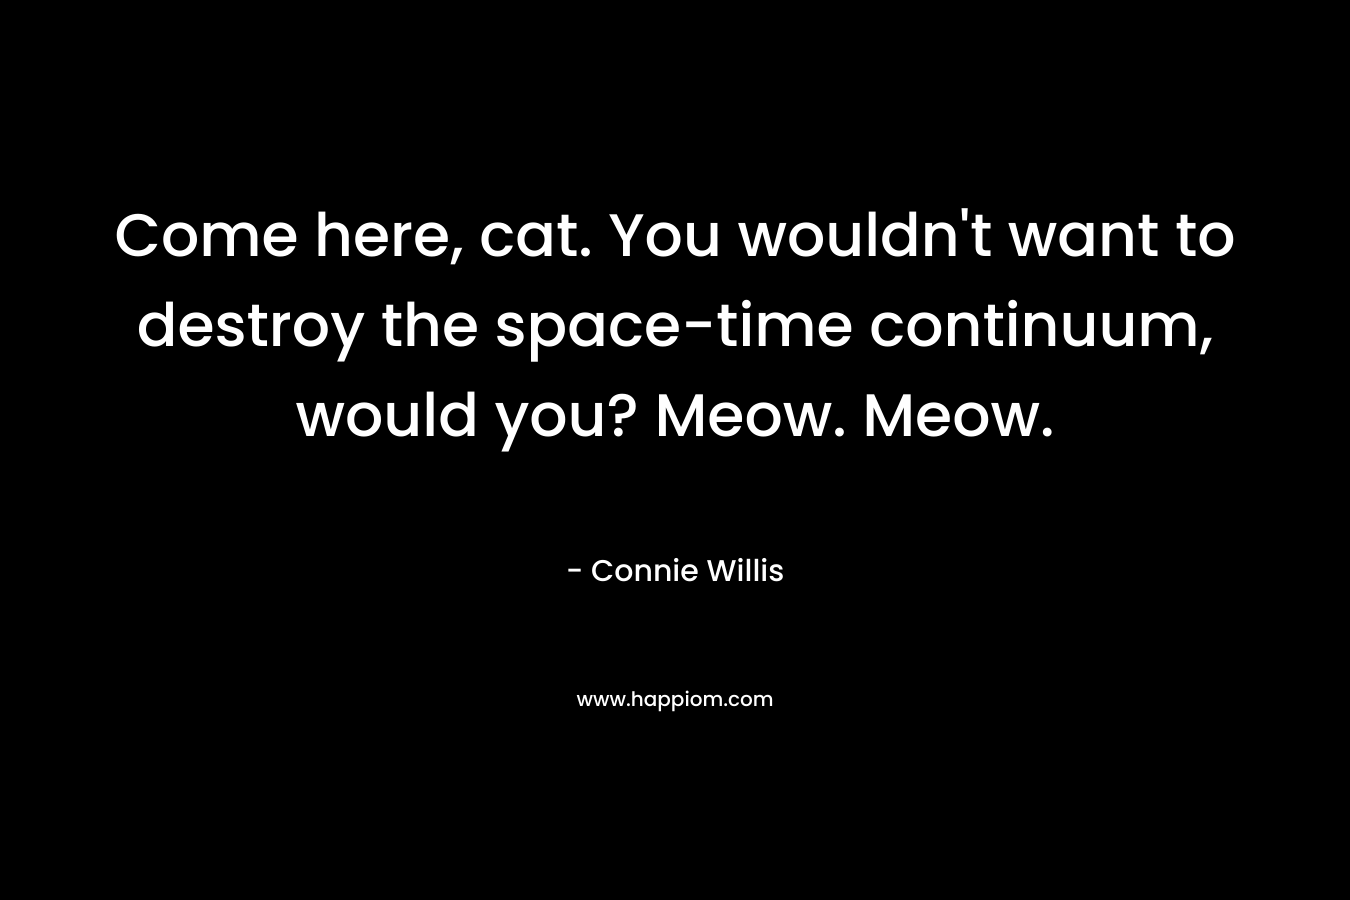 Come here, cat. You wouldn’t want to destroy the space-time continuum, would you? Meow. Meow. – Connie Willis